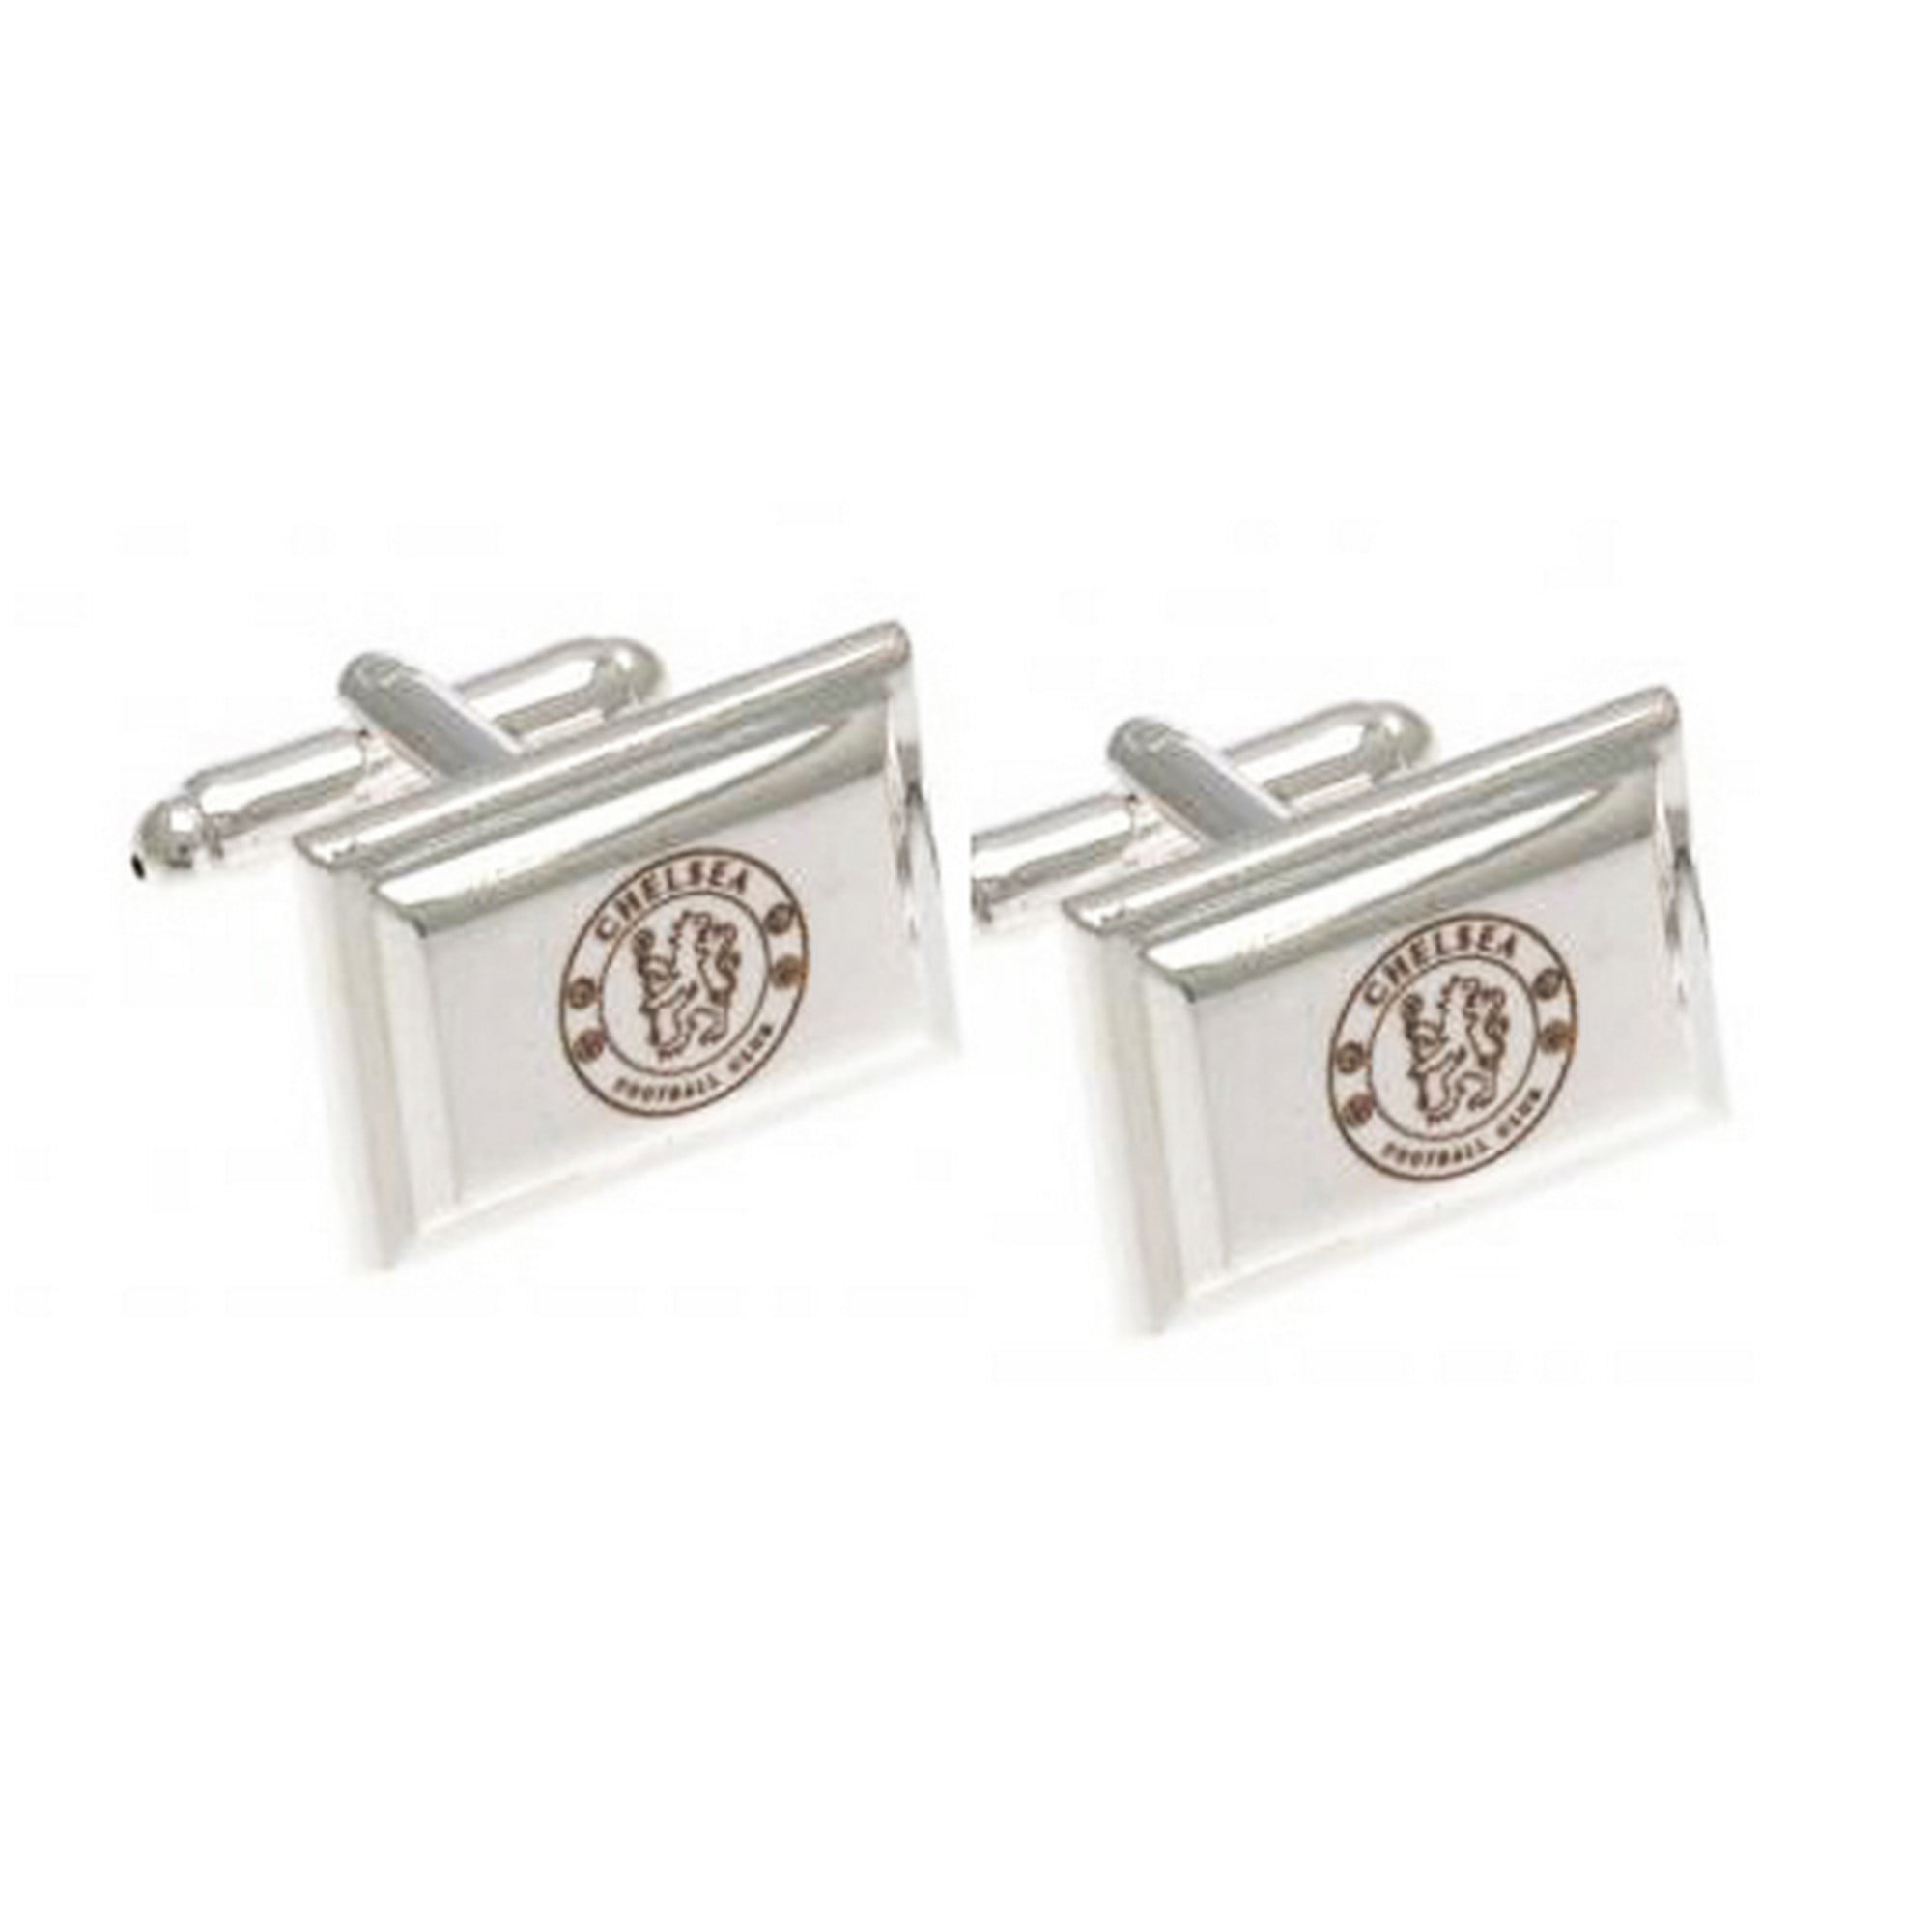 New Official Harry Potter Silver Plated Cufflinks in Gift Box 